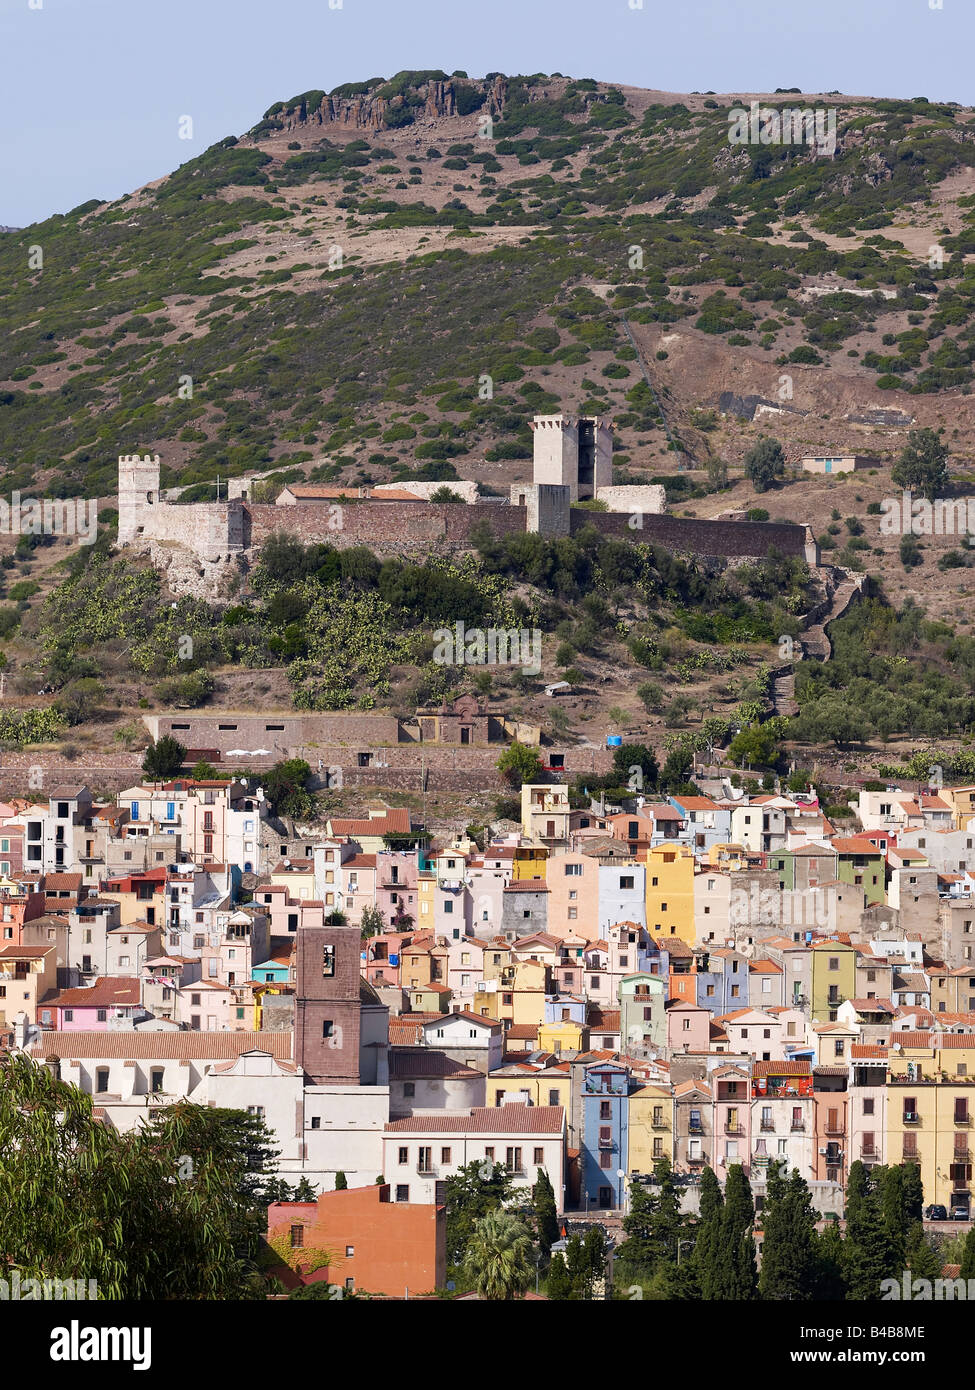 Bosa,a medieval little town in Sardinia,Italy Stock Photo